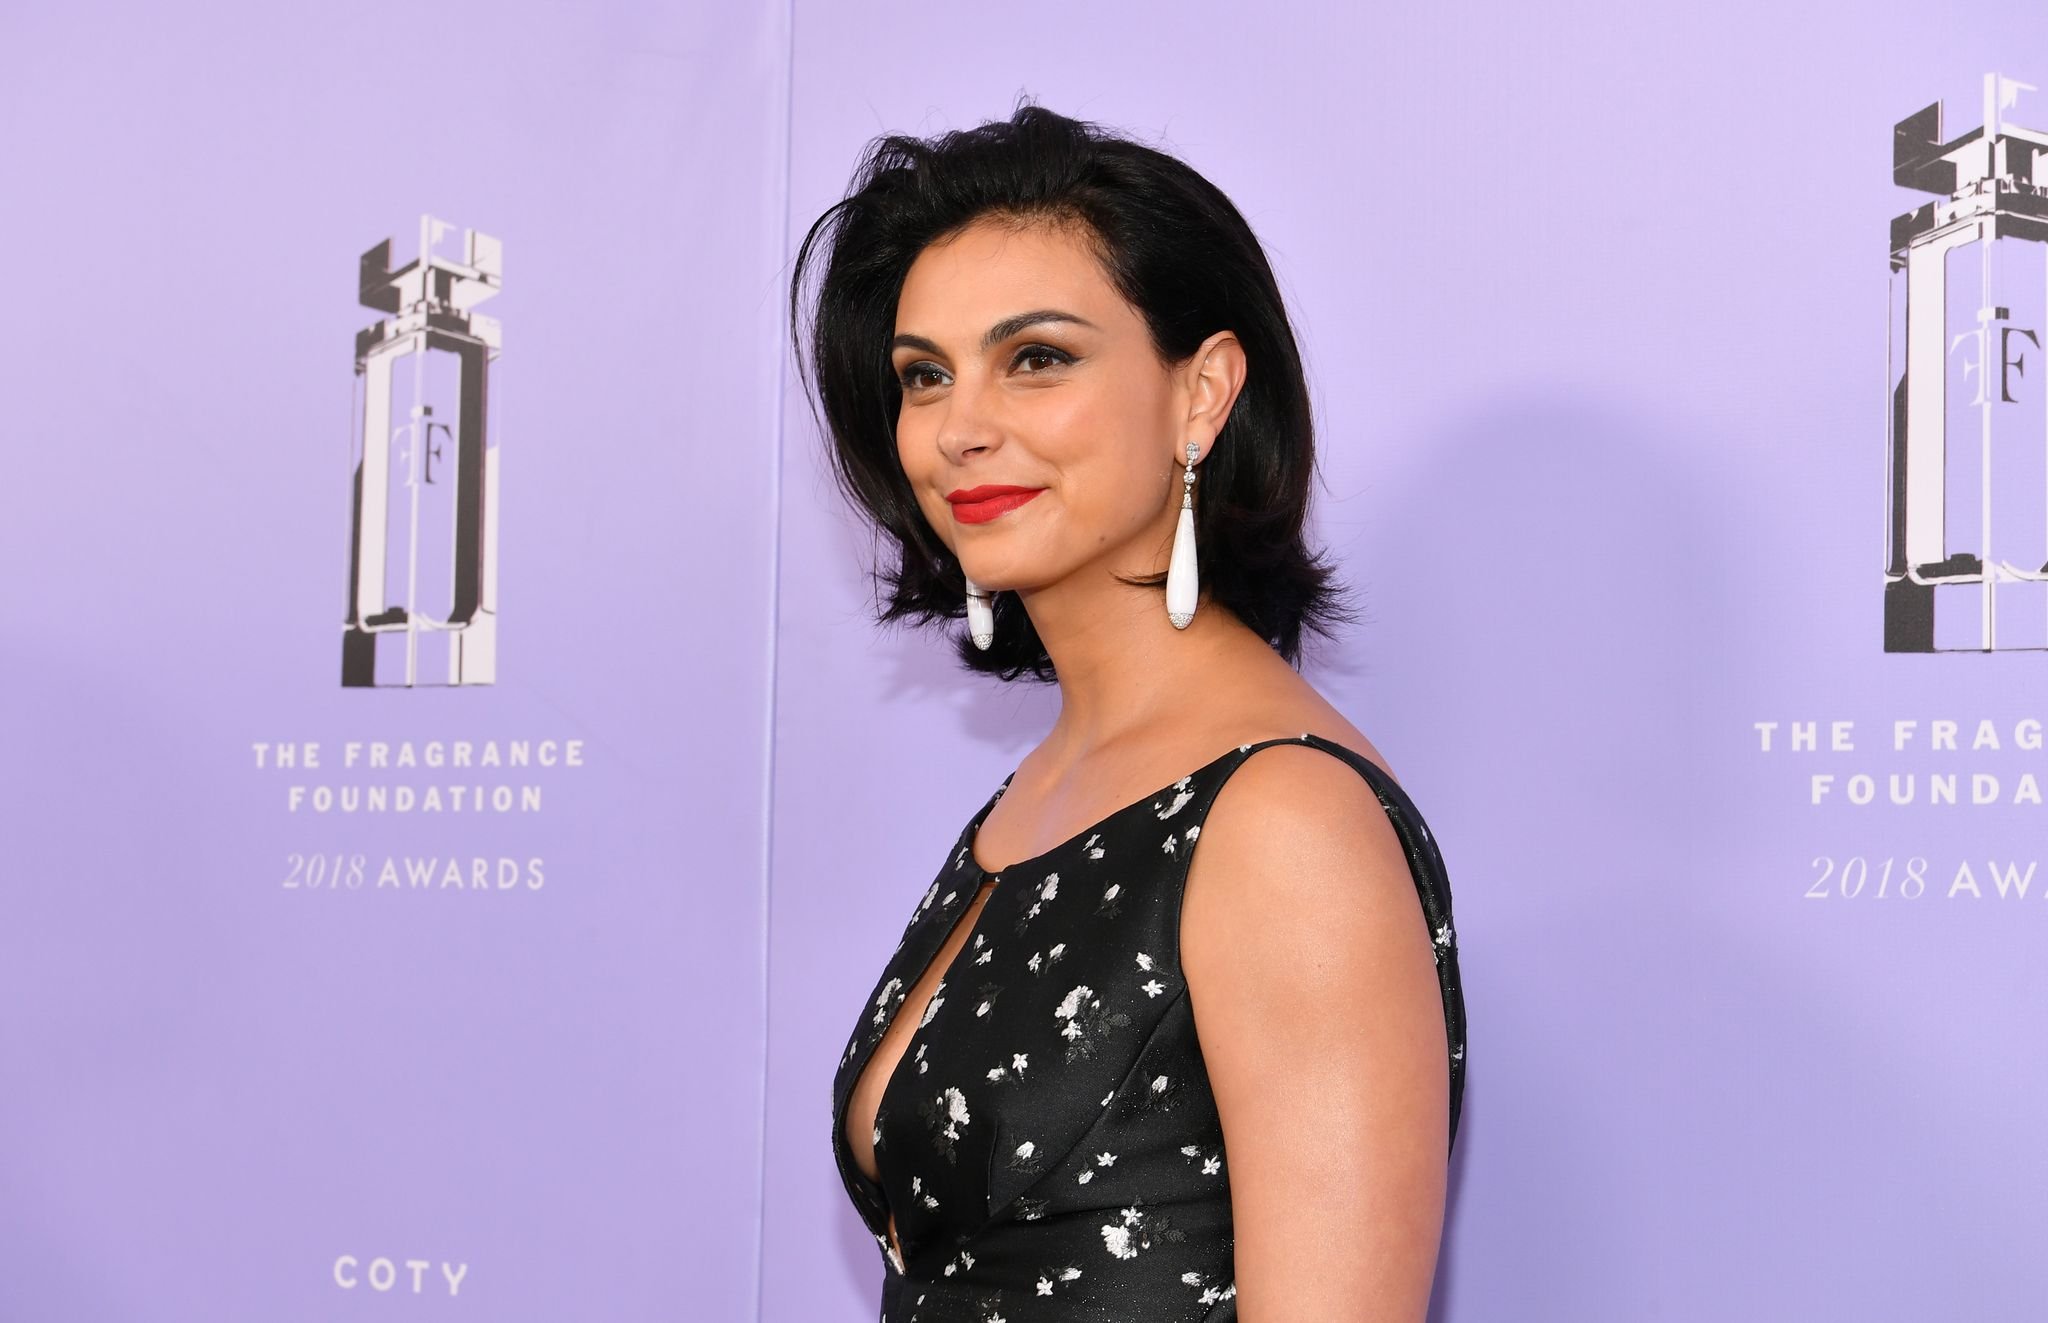 Morena Baccarin at the 2018 Fragrance Foundation Awards in 2018 in New York City | Source: Getty Images